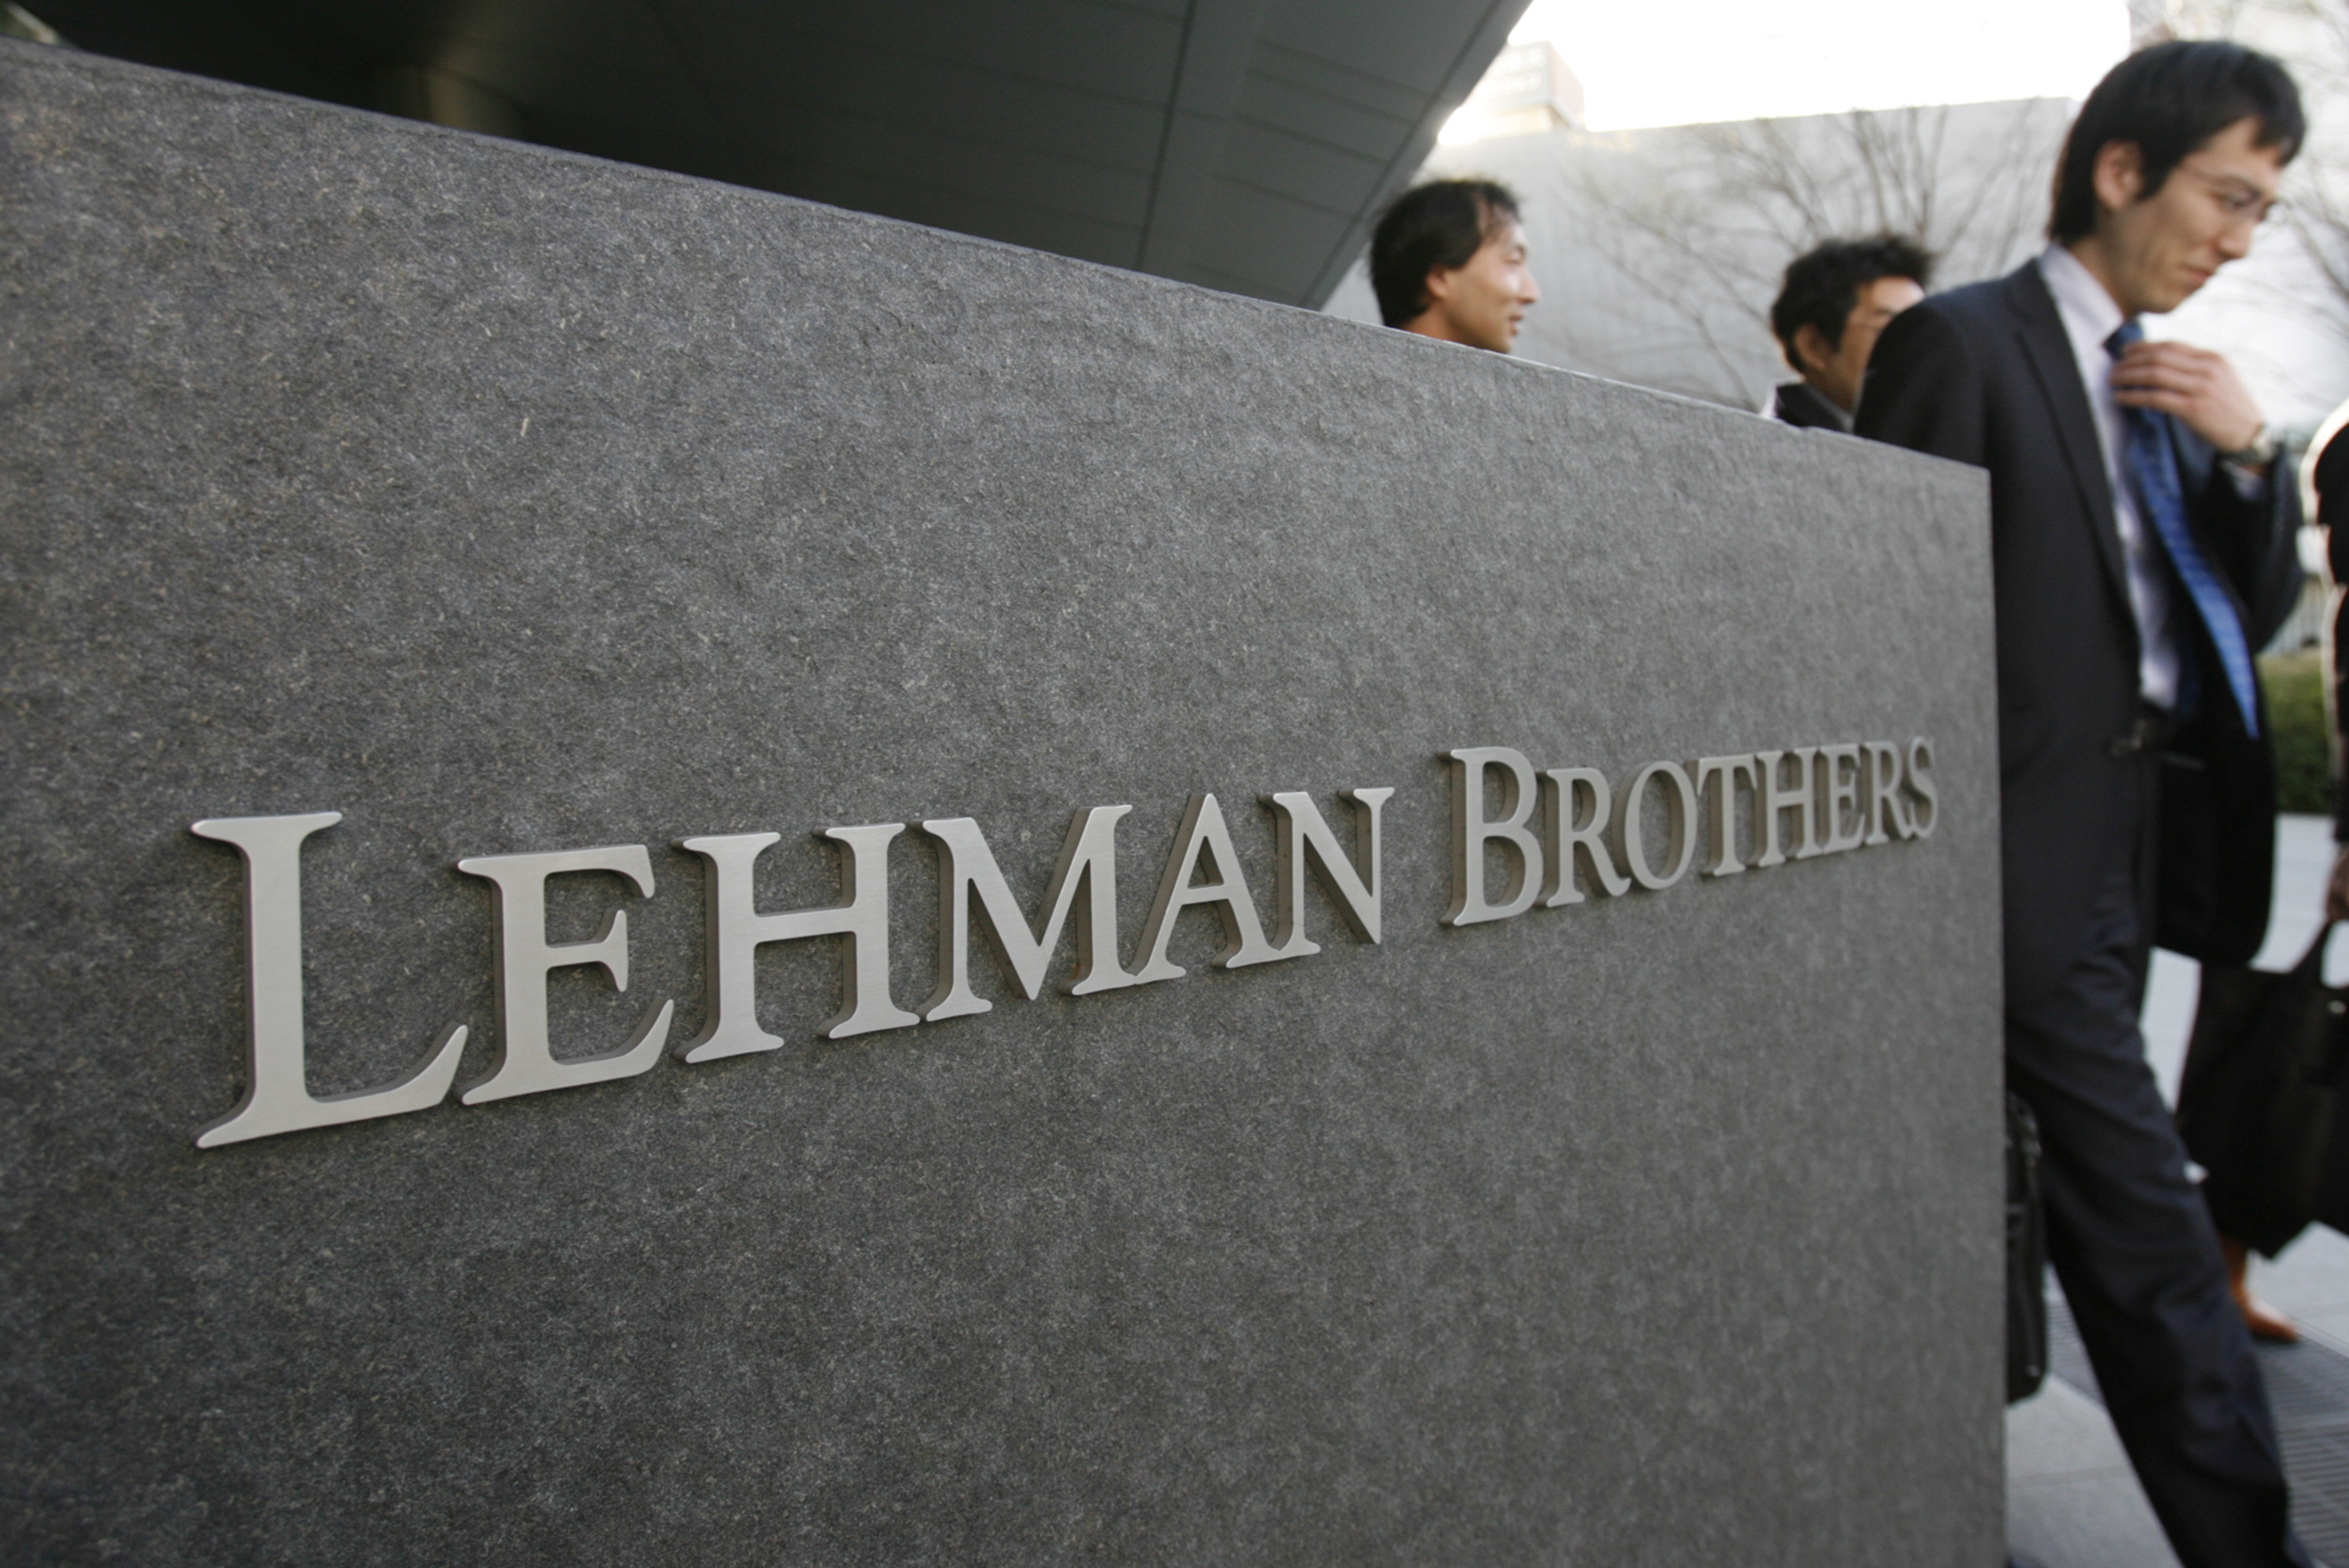 History credits Lehman Brothers' collapse for the 2008 financial crisis. Here's why that narrative is wrong | Brookings